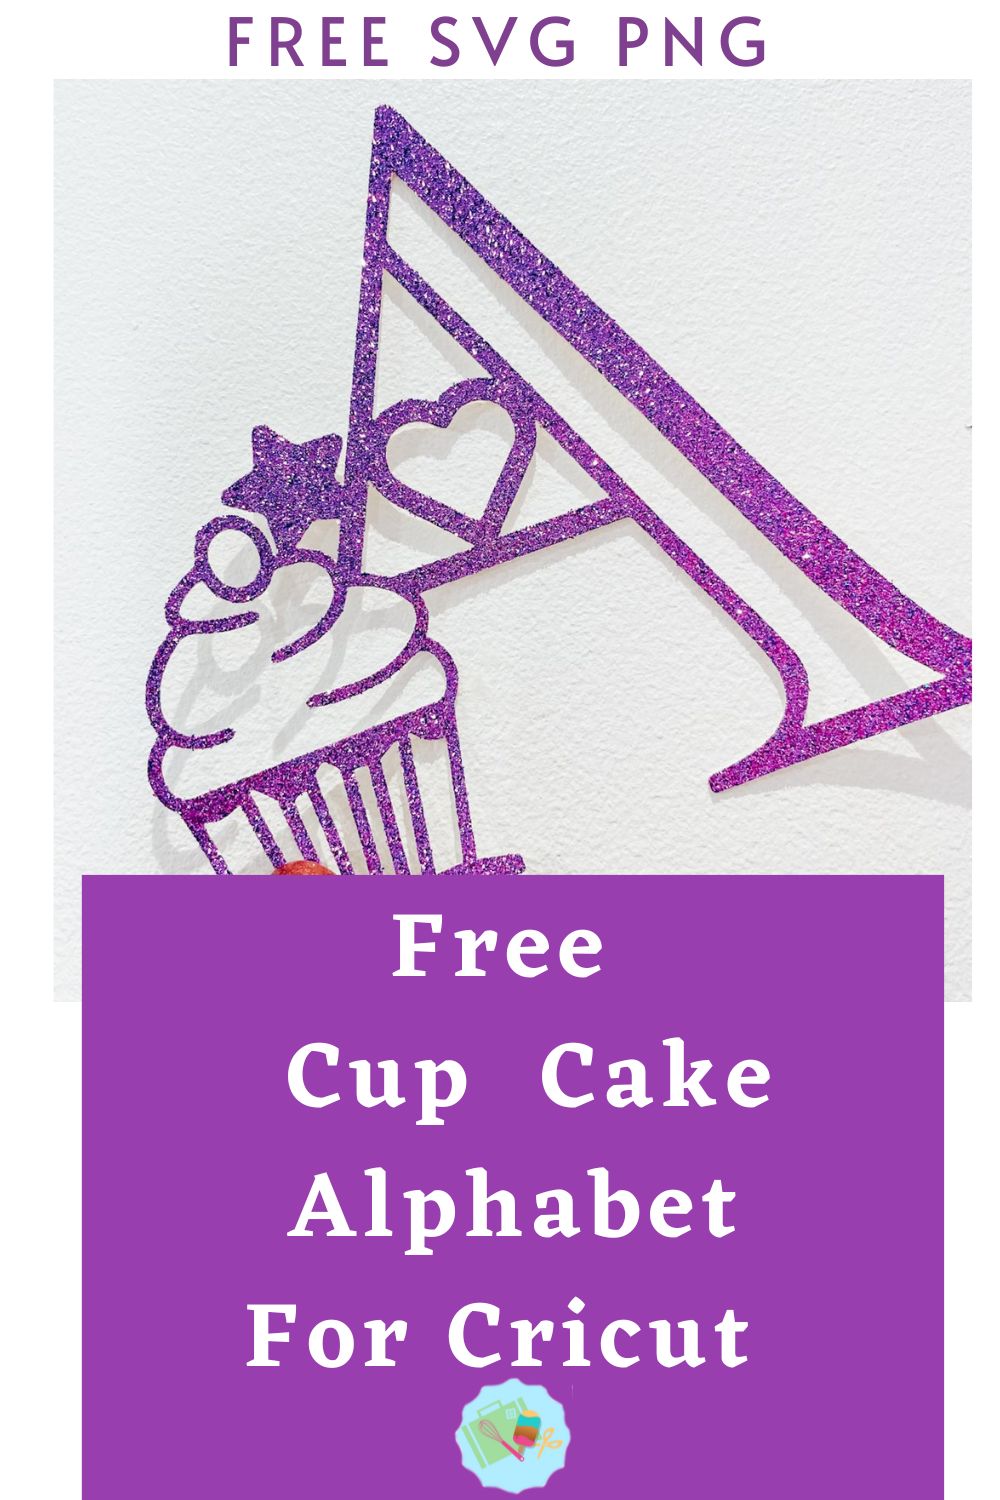 Free SVG Cup Cake Alphabet and numbers for crafting and scrapbooking